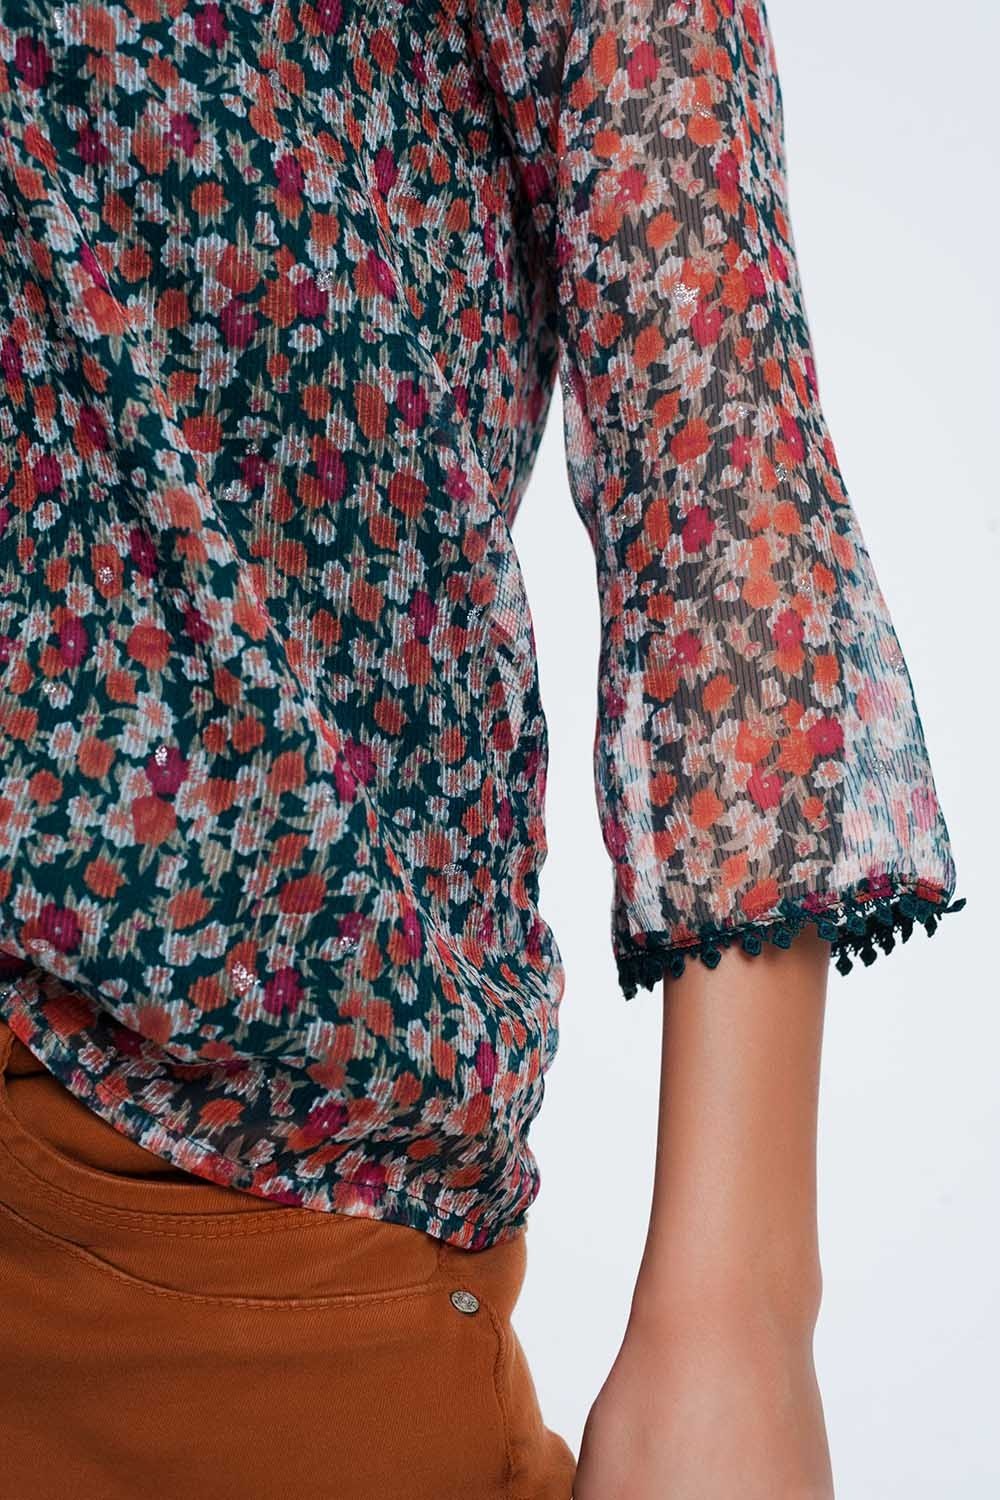 Green Shirt With Floral Print